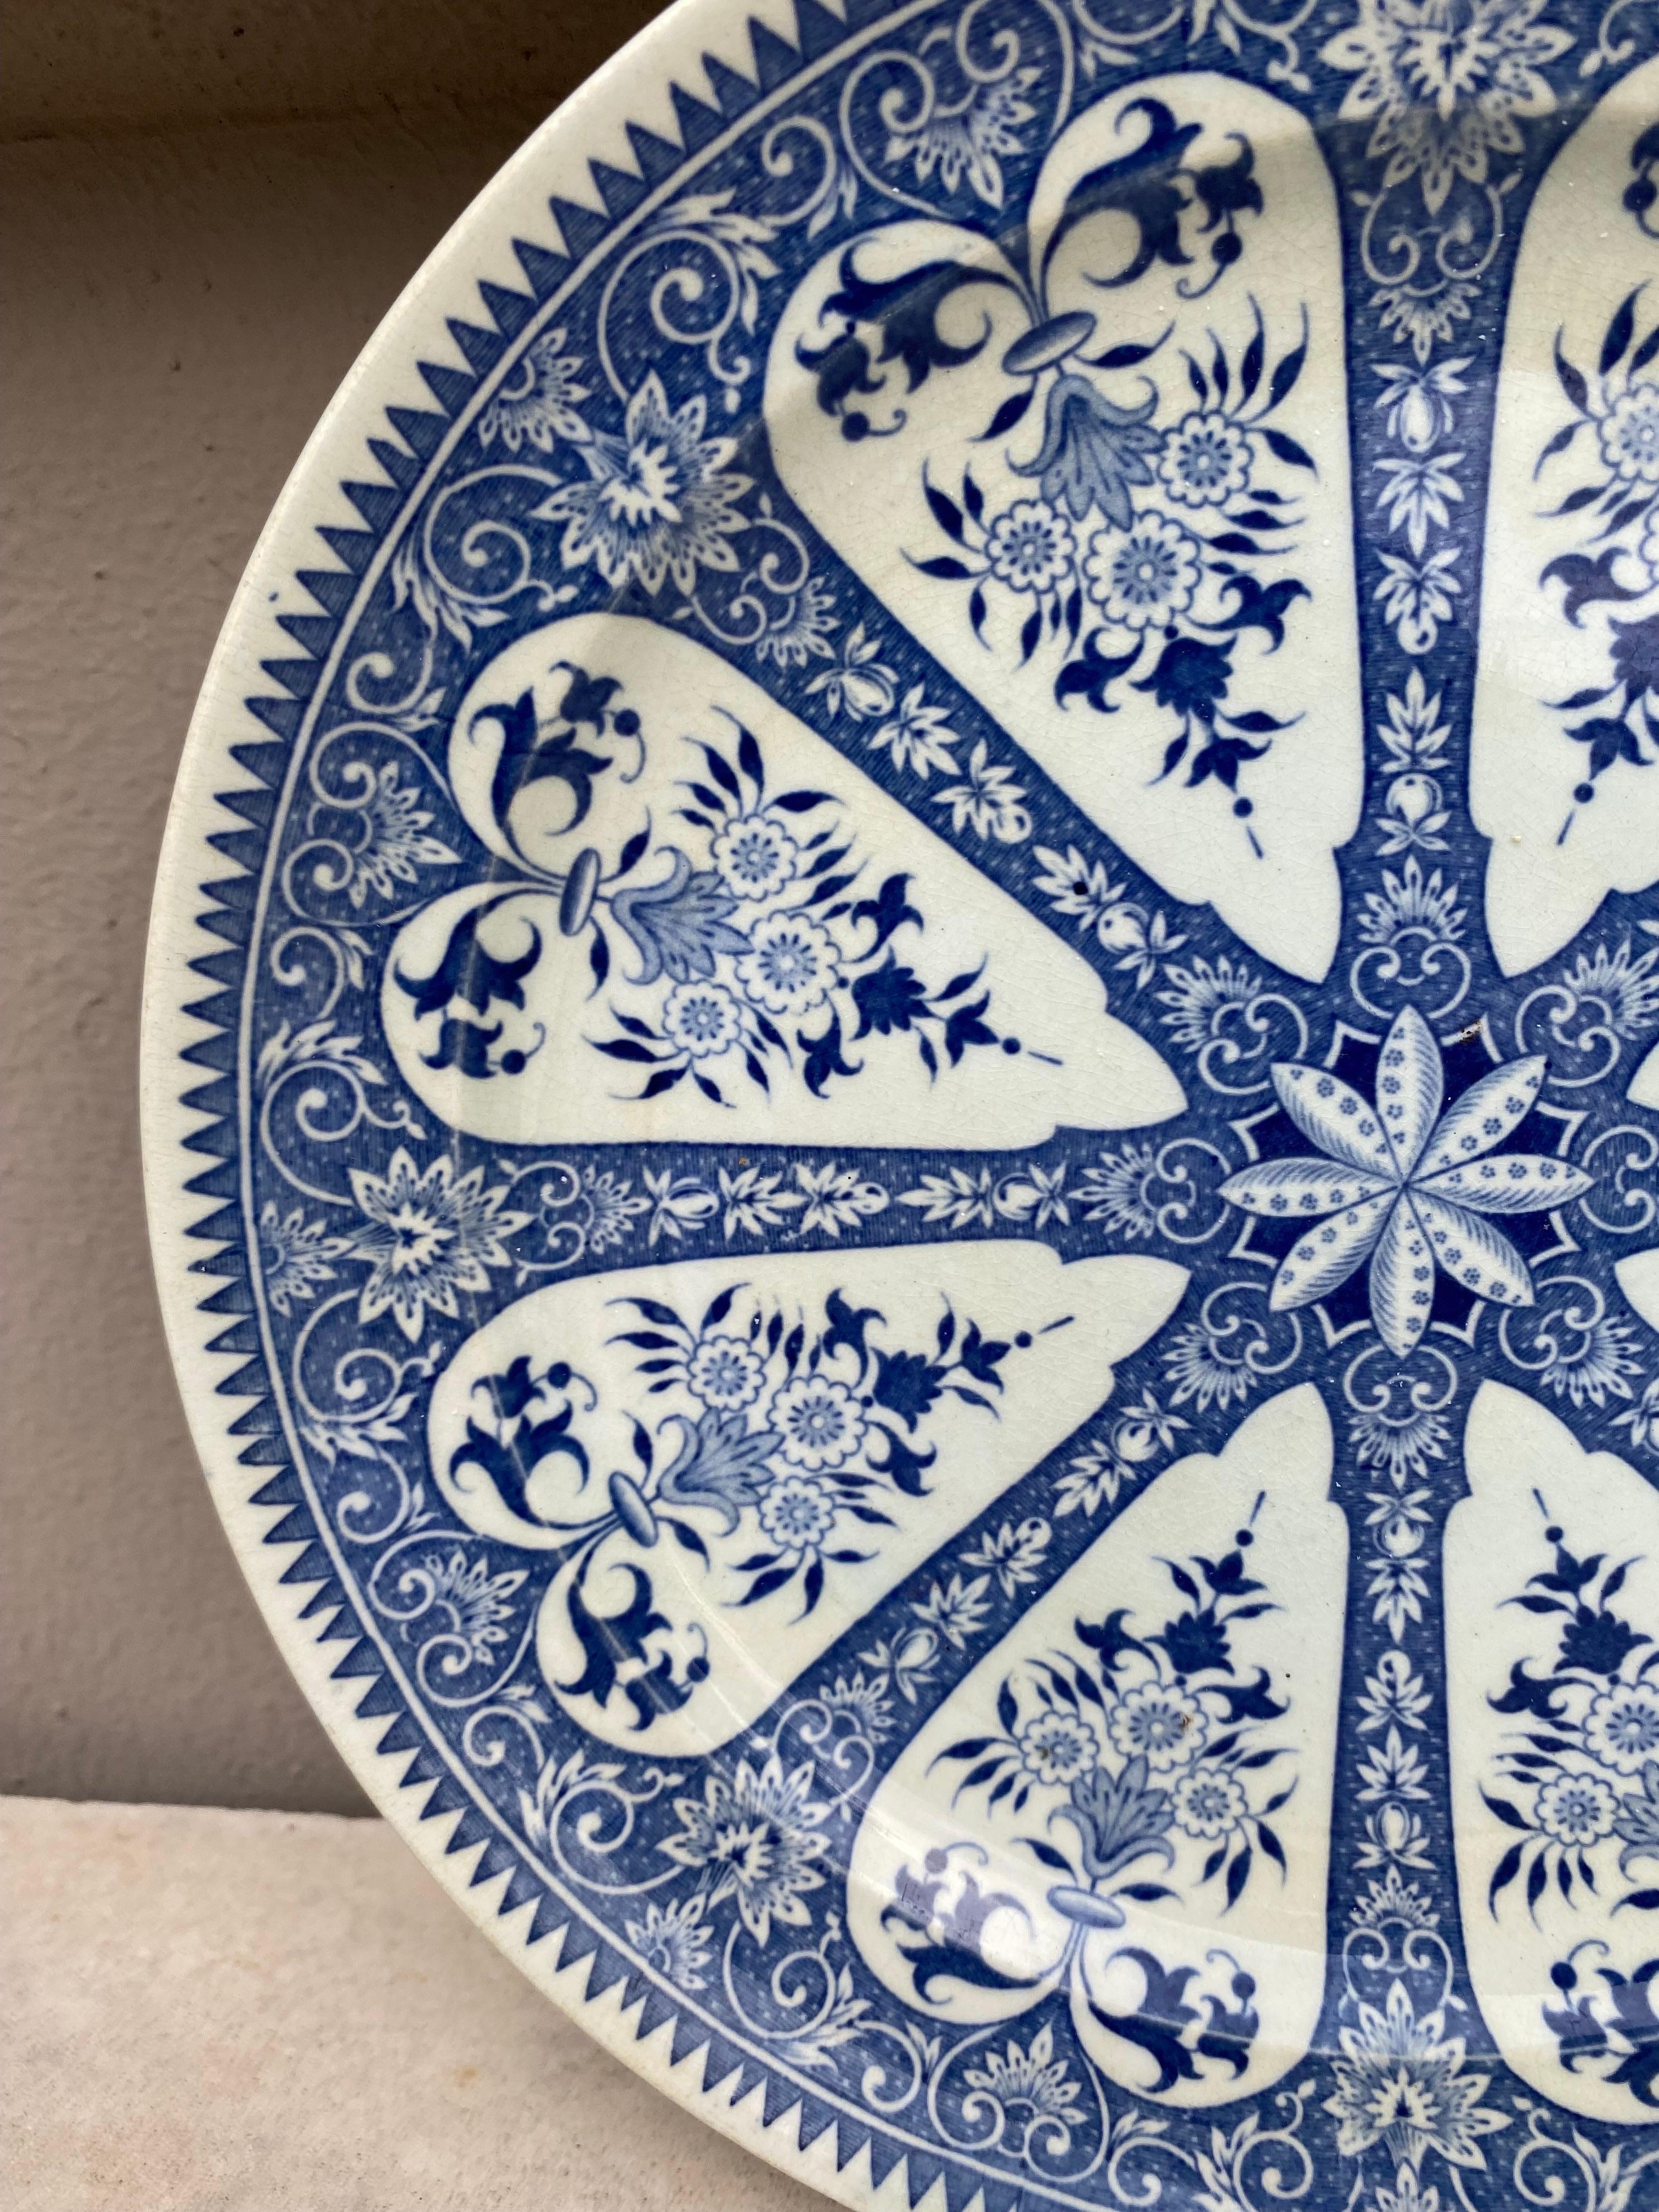 French Provincial 19th Century French Blue & White Faience Dinner Plate Sarreguemines For Sale